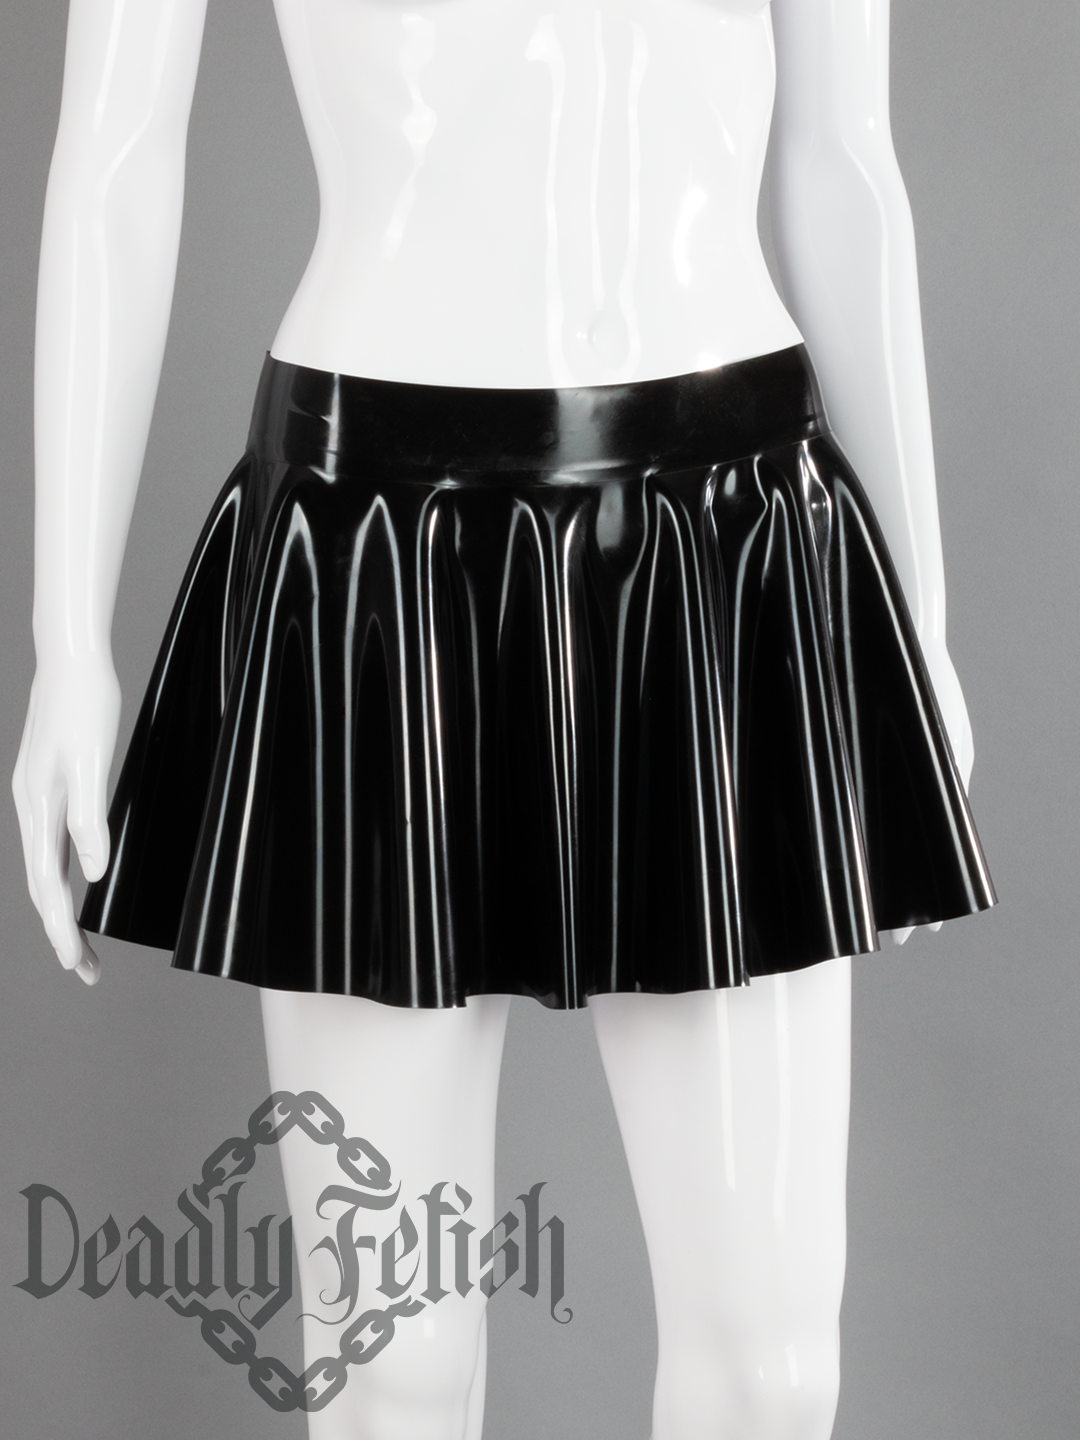 Deadly Fetish Made-To-Order Latex: Skirt #07